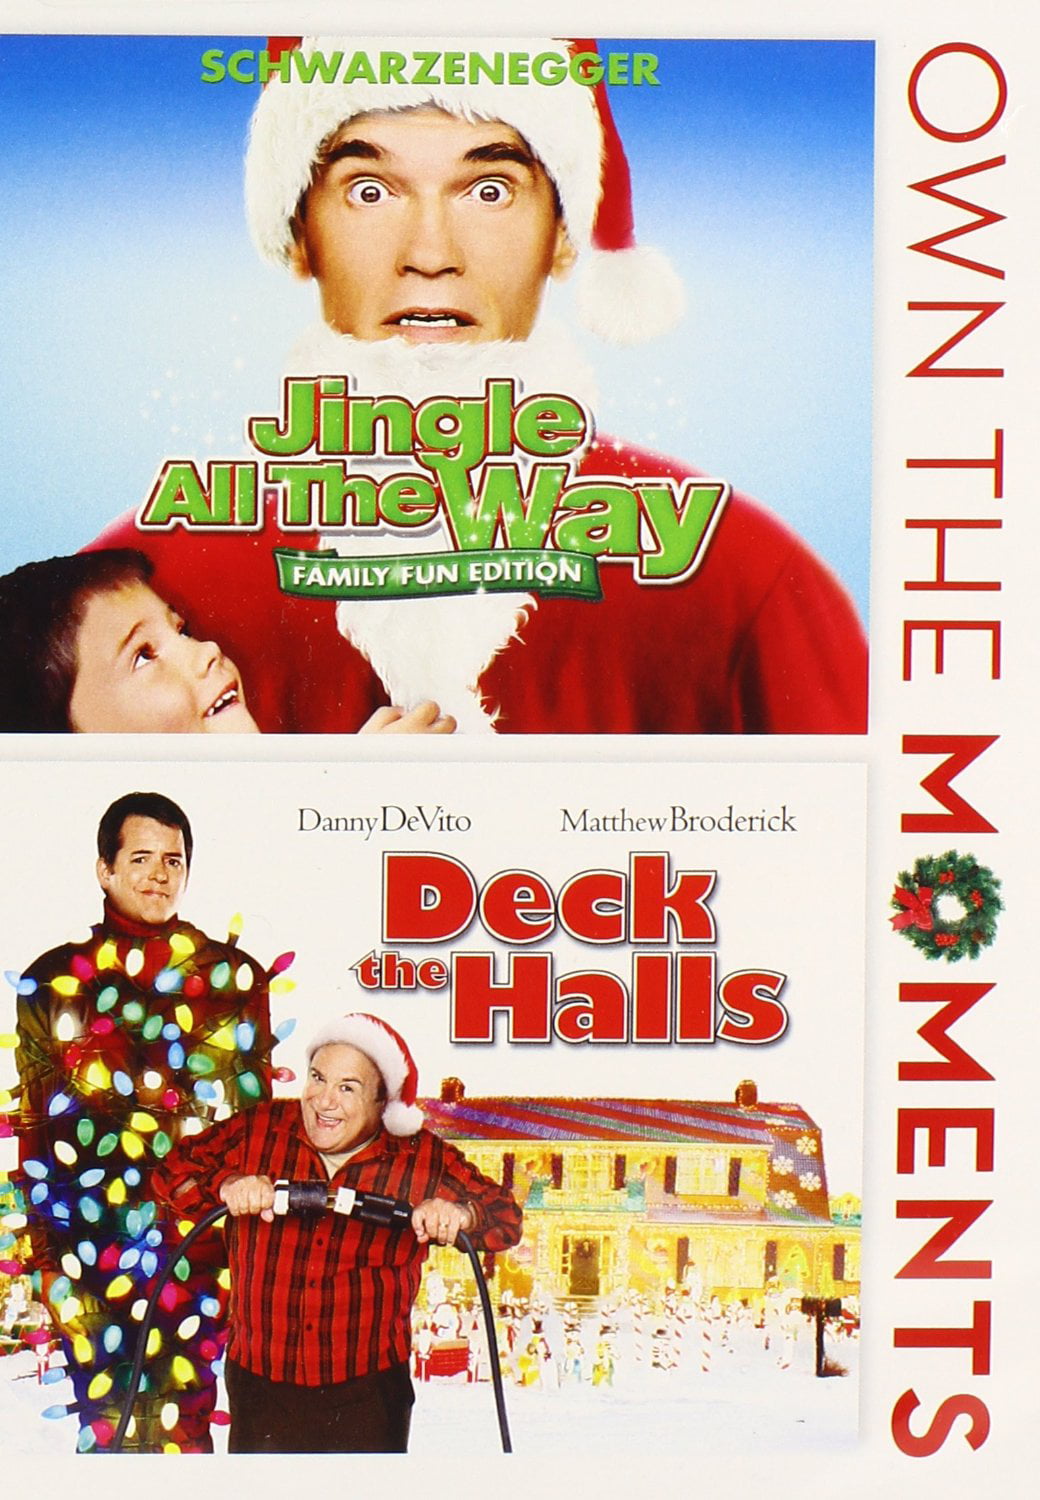 jingle all the way movie poster